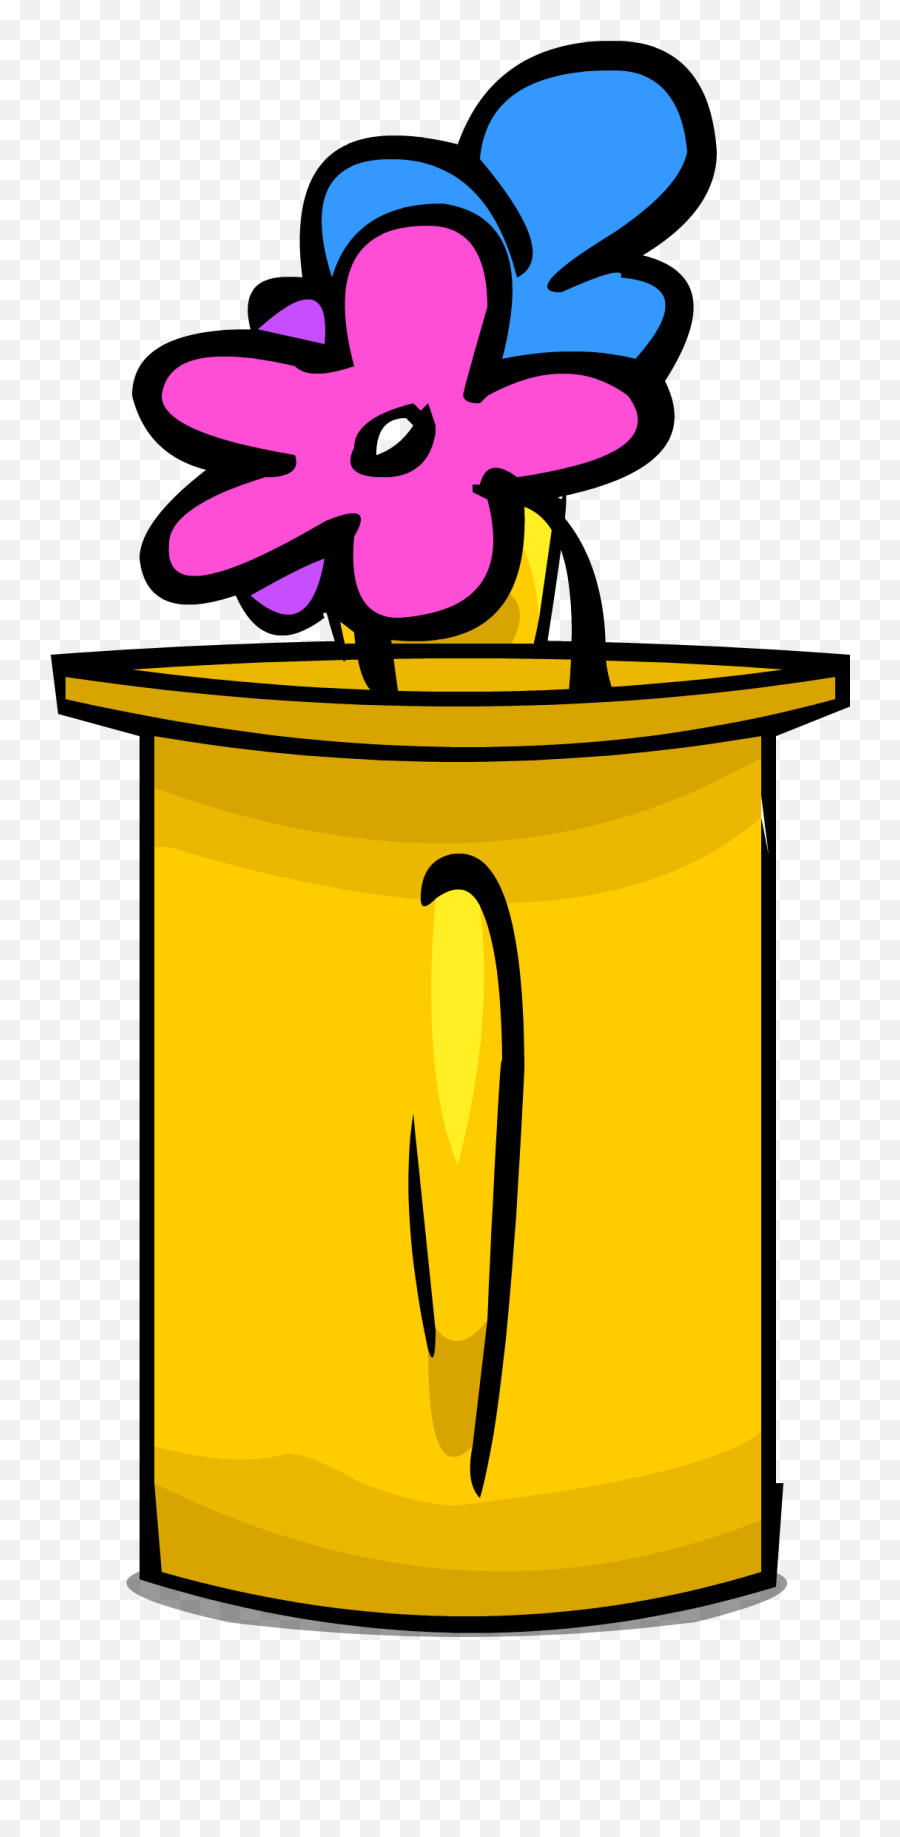 Download Hd Watering Can Sprite 006 Transparent Png Image - Portable Network Graphics,Sprite Can Png